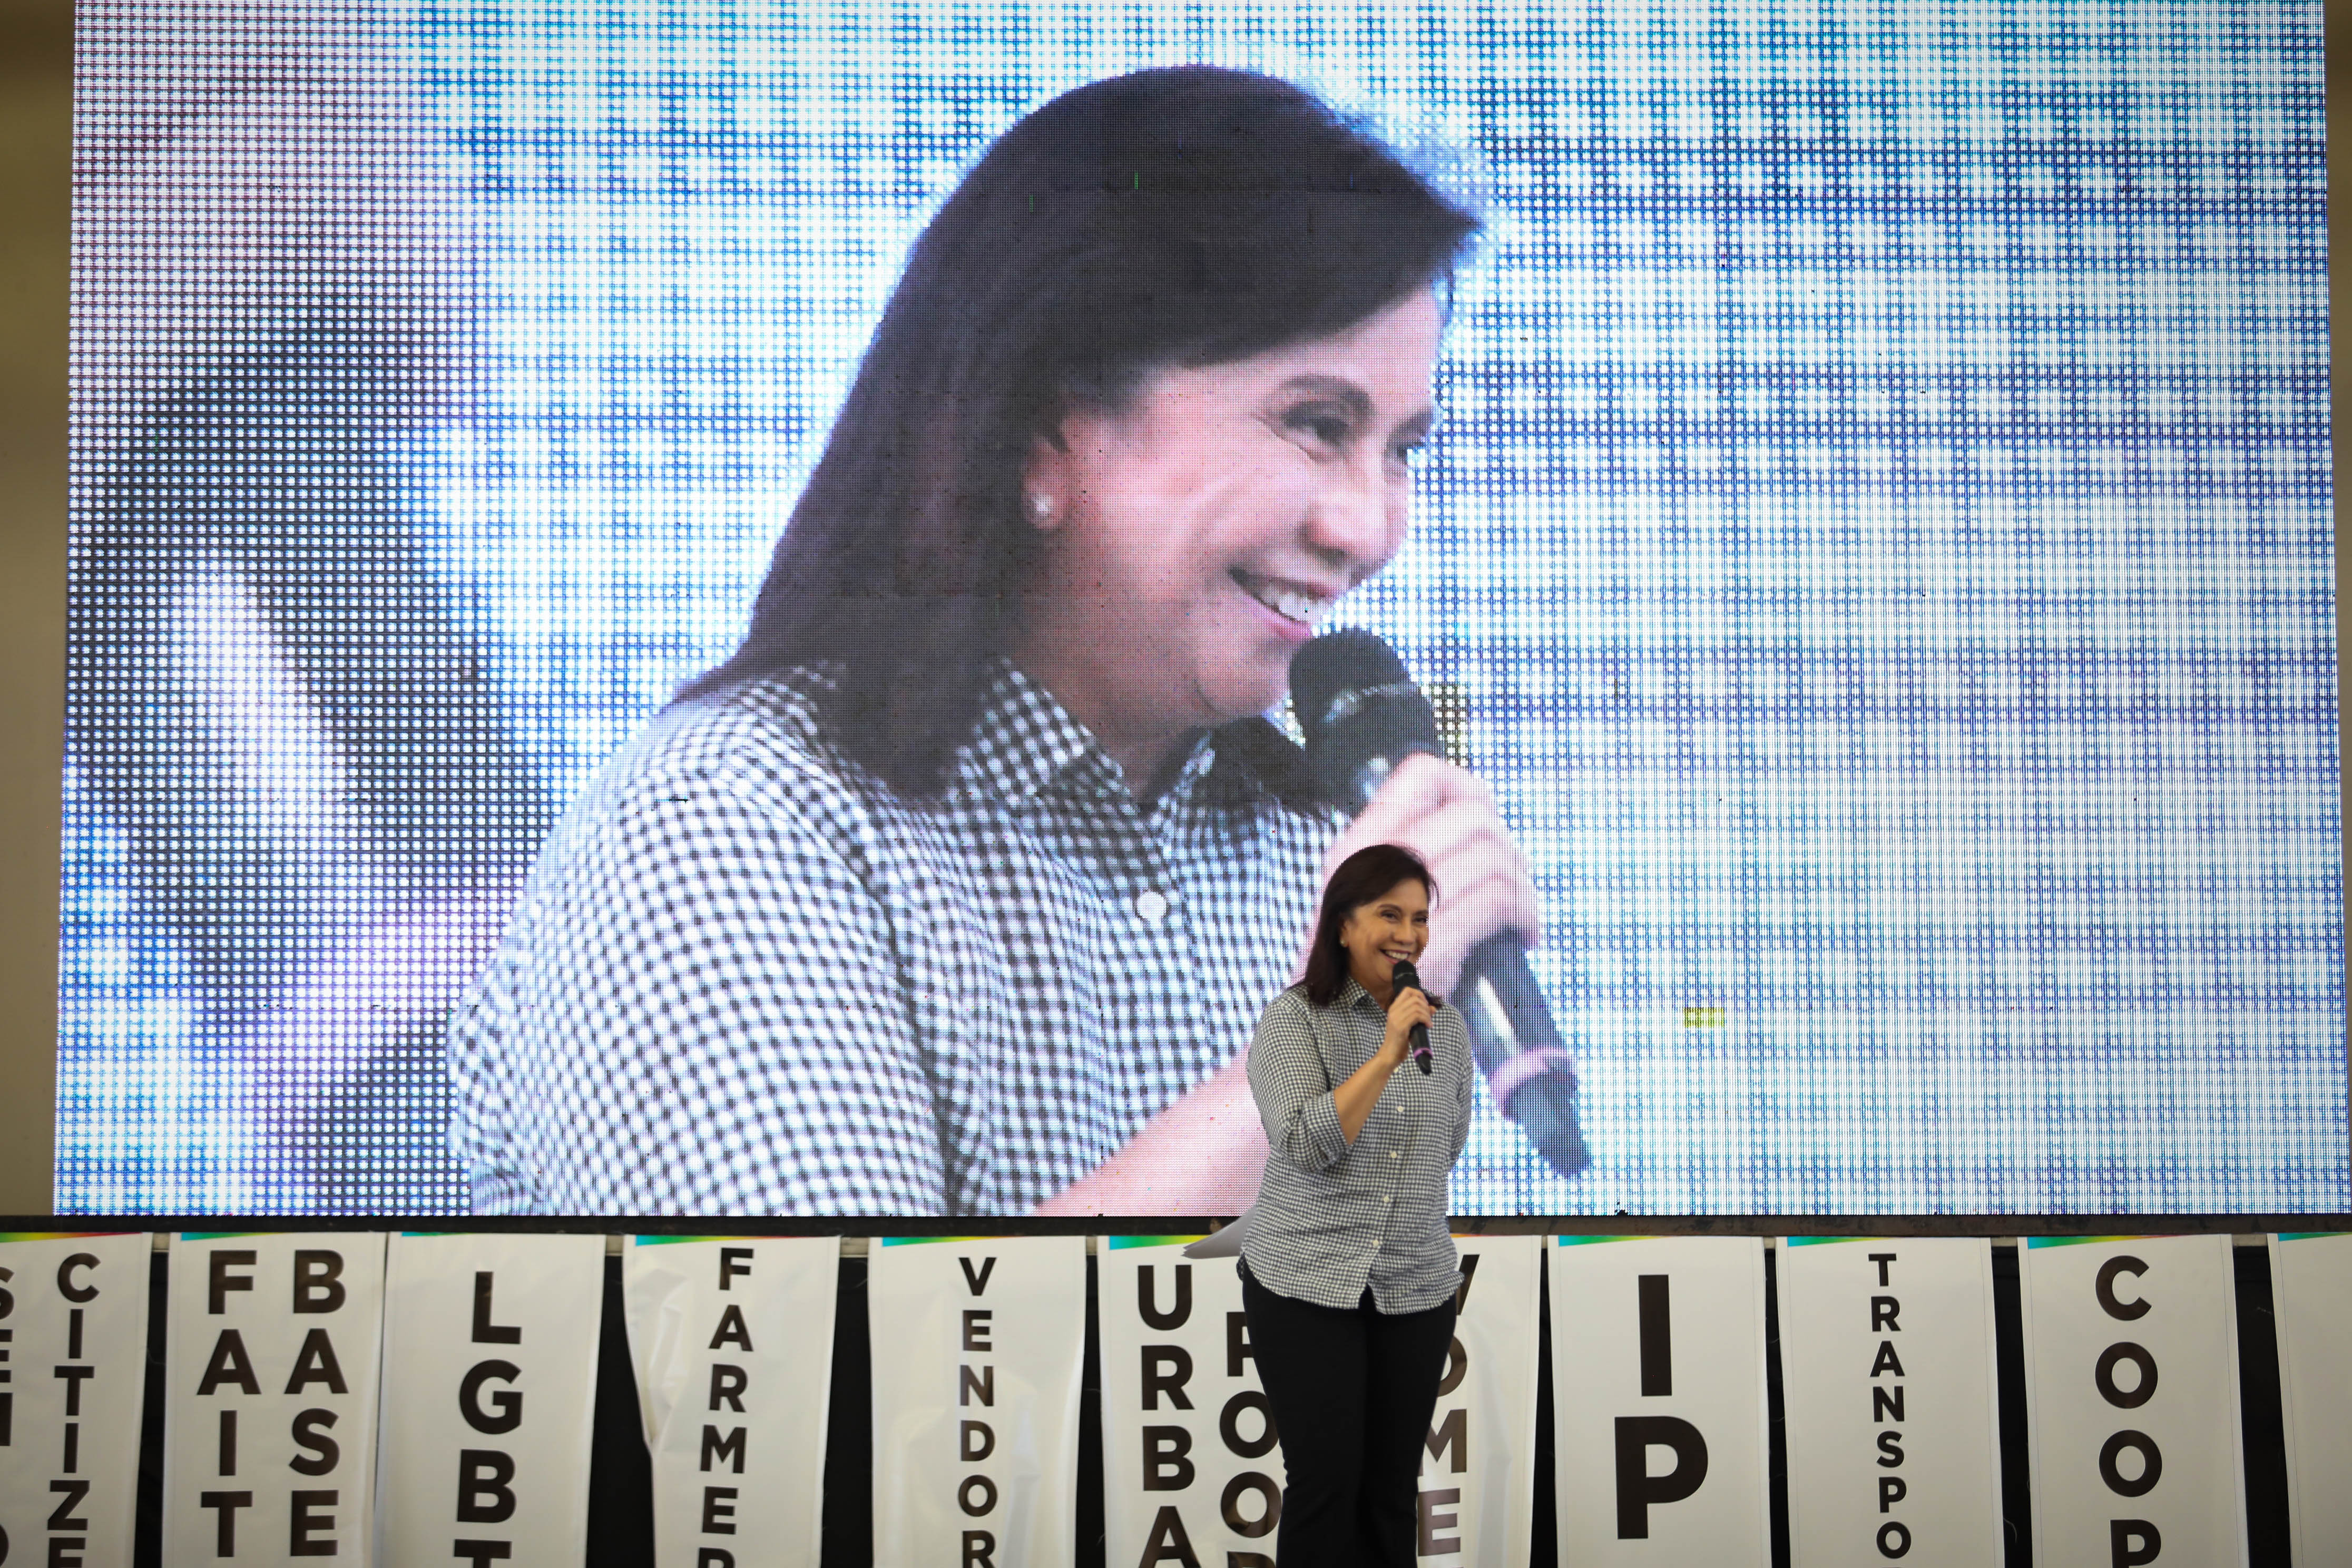 RATING UP. Vice President Leni Robredo shows a 15-point increase in her net satisfaction rating, according to the March 2018 SWS survey released on her 54th birthday on April 23, 2019. Photo by OVP  